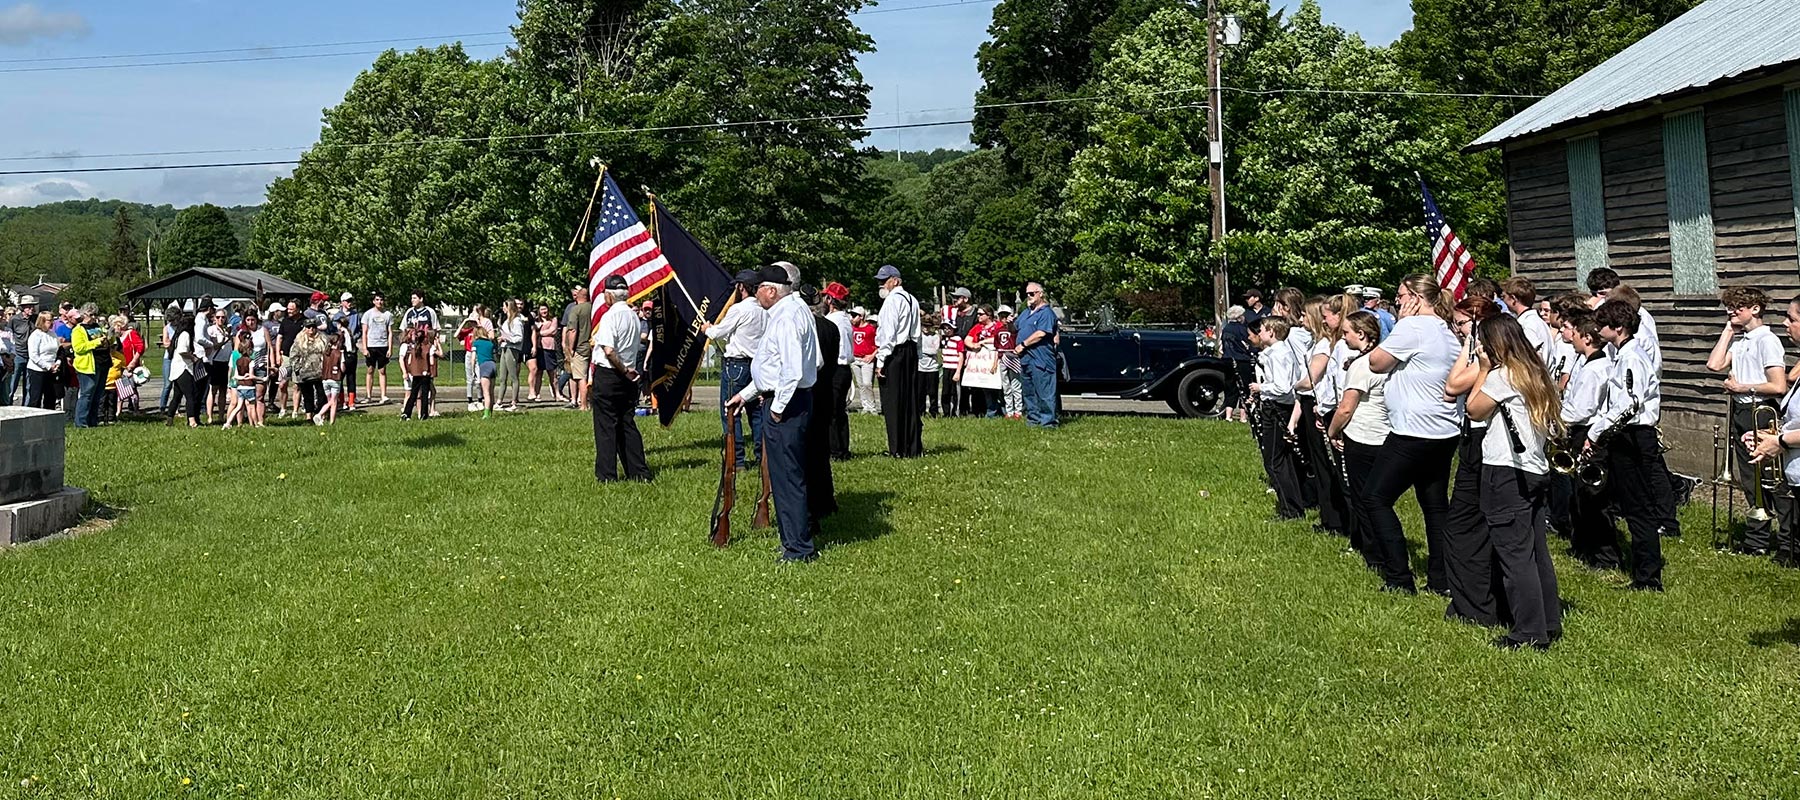 Outdoors in a park with green grass and trees, a group of veterans in uniform, of of whom holds the American flag.